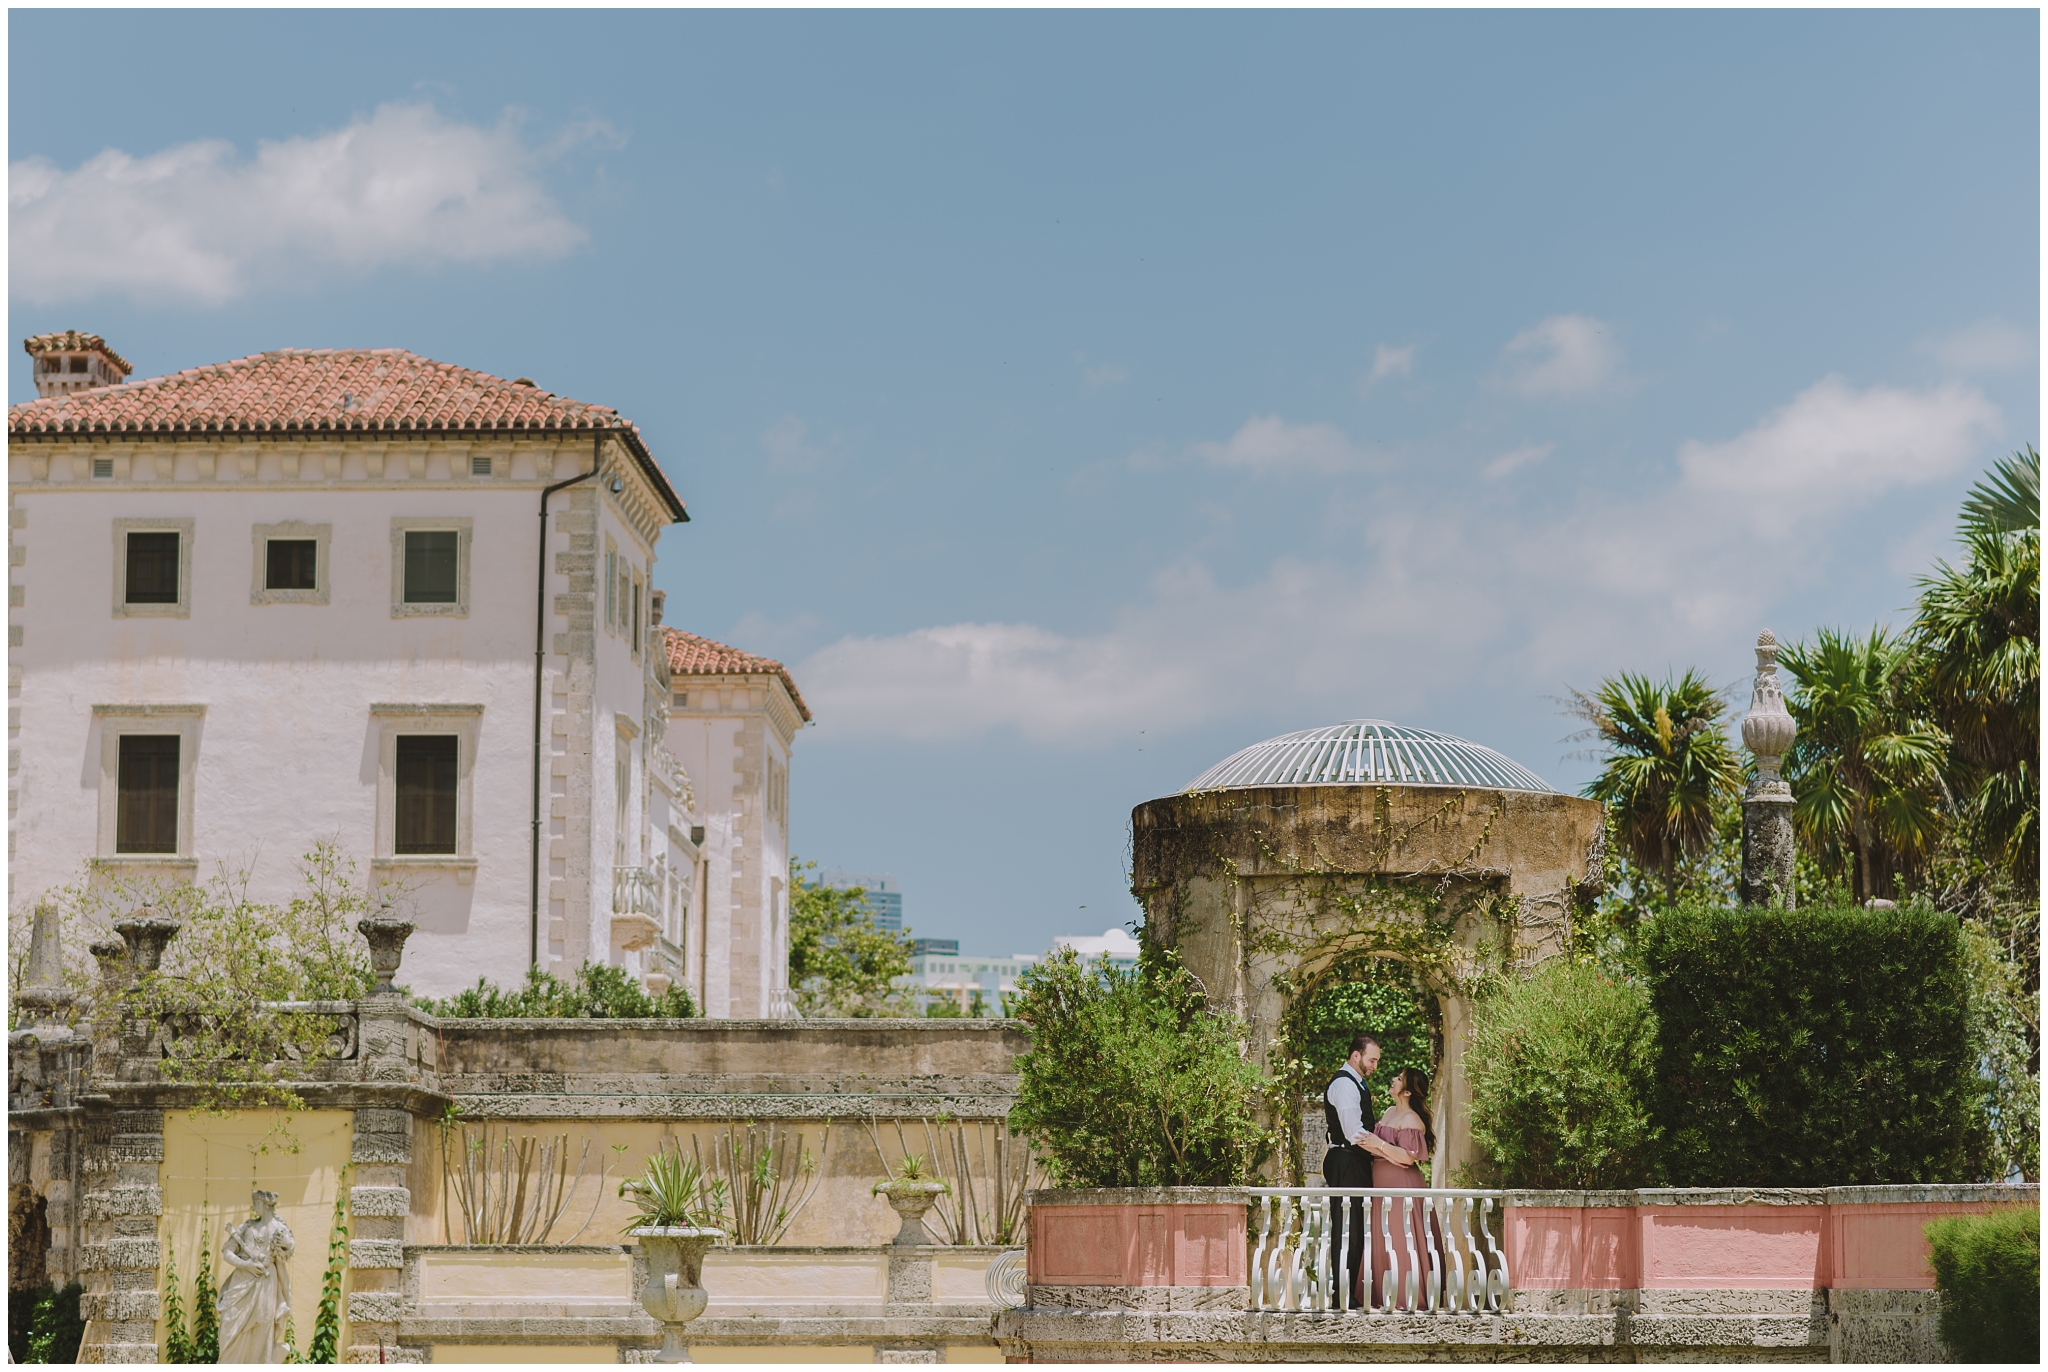 vizcaya house in the background